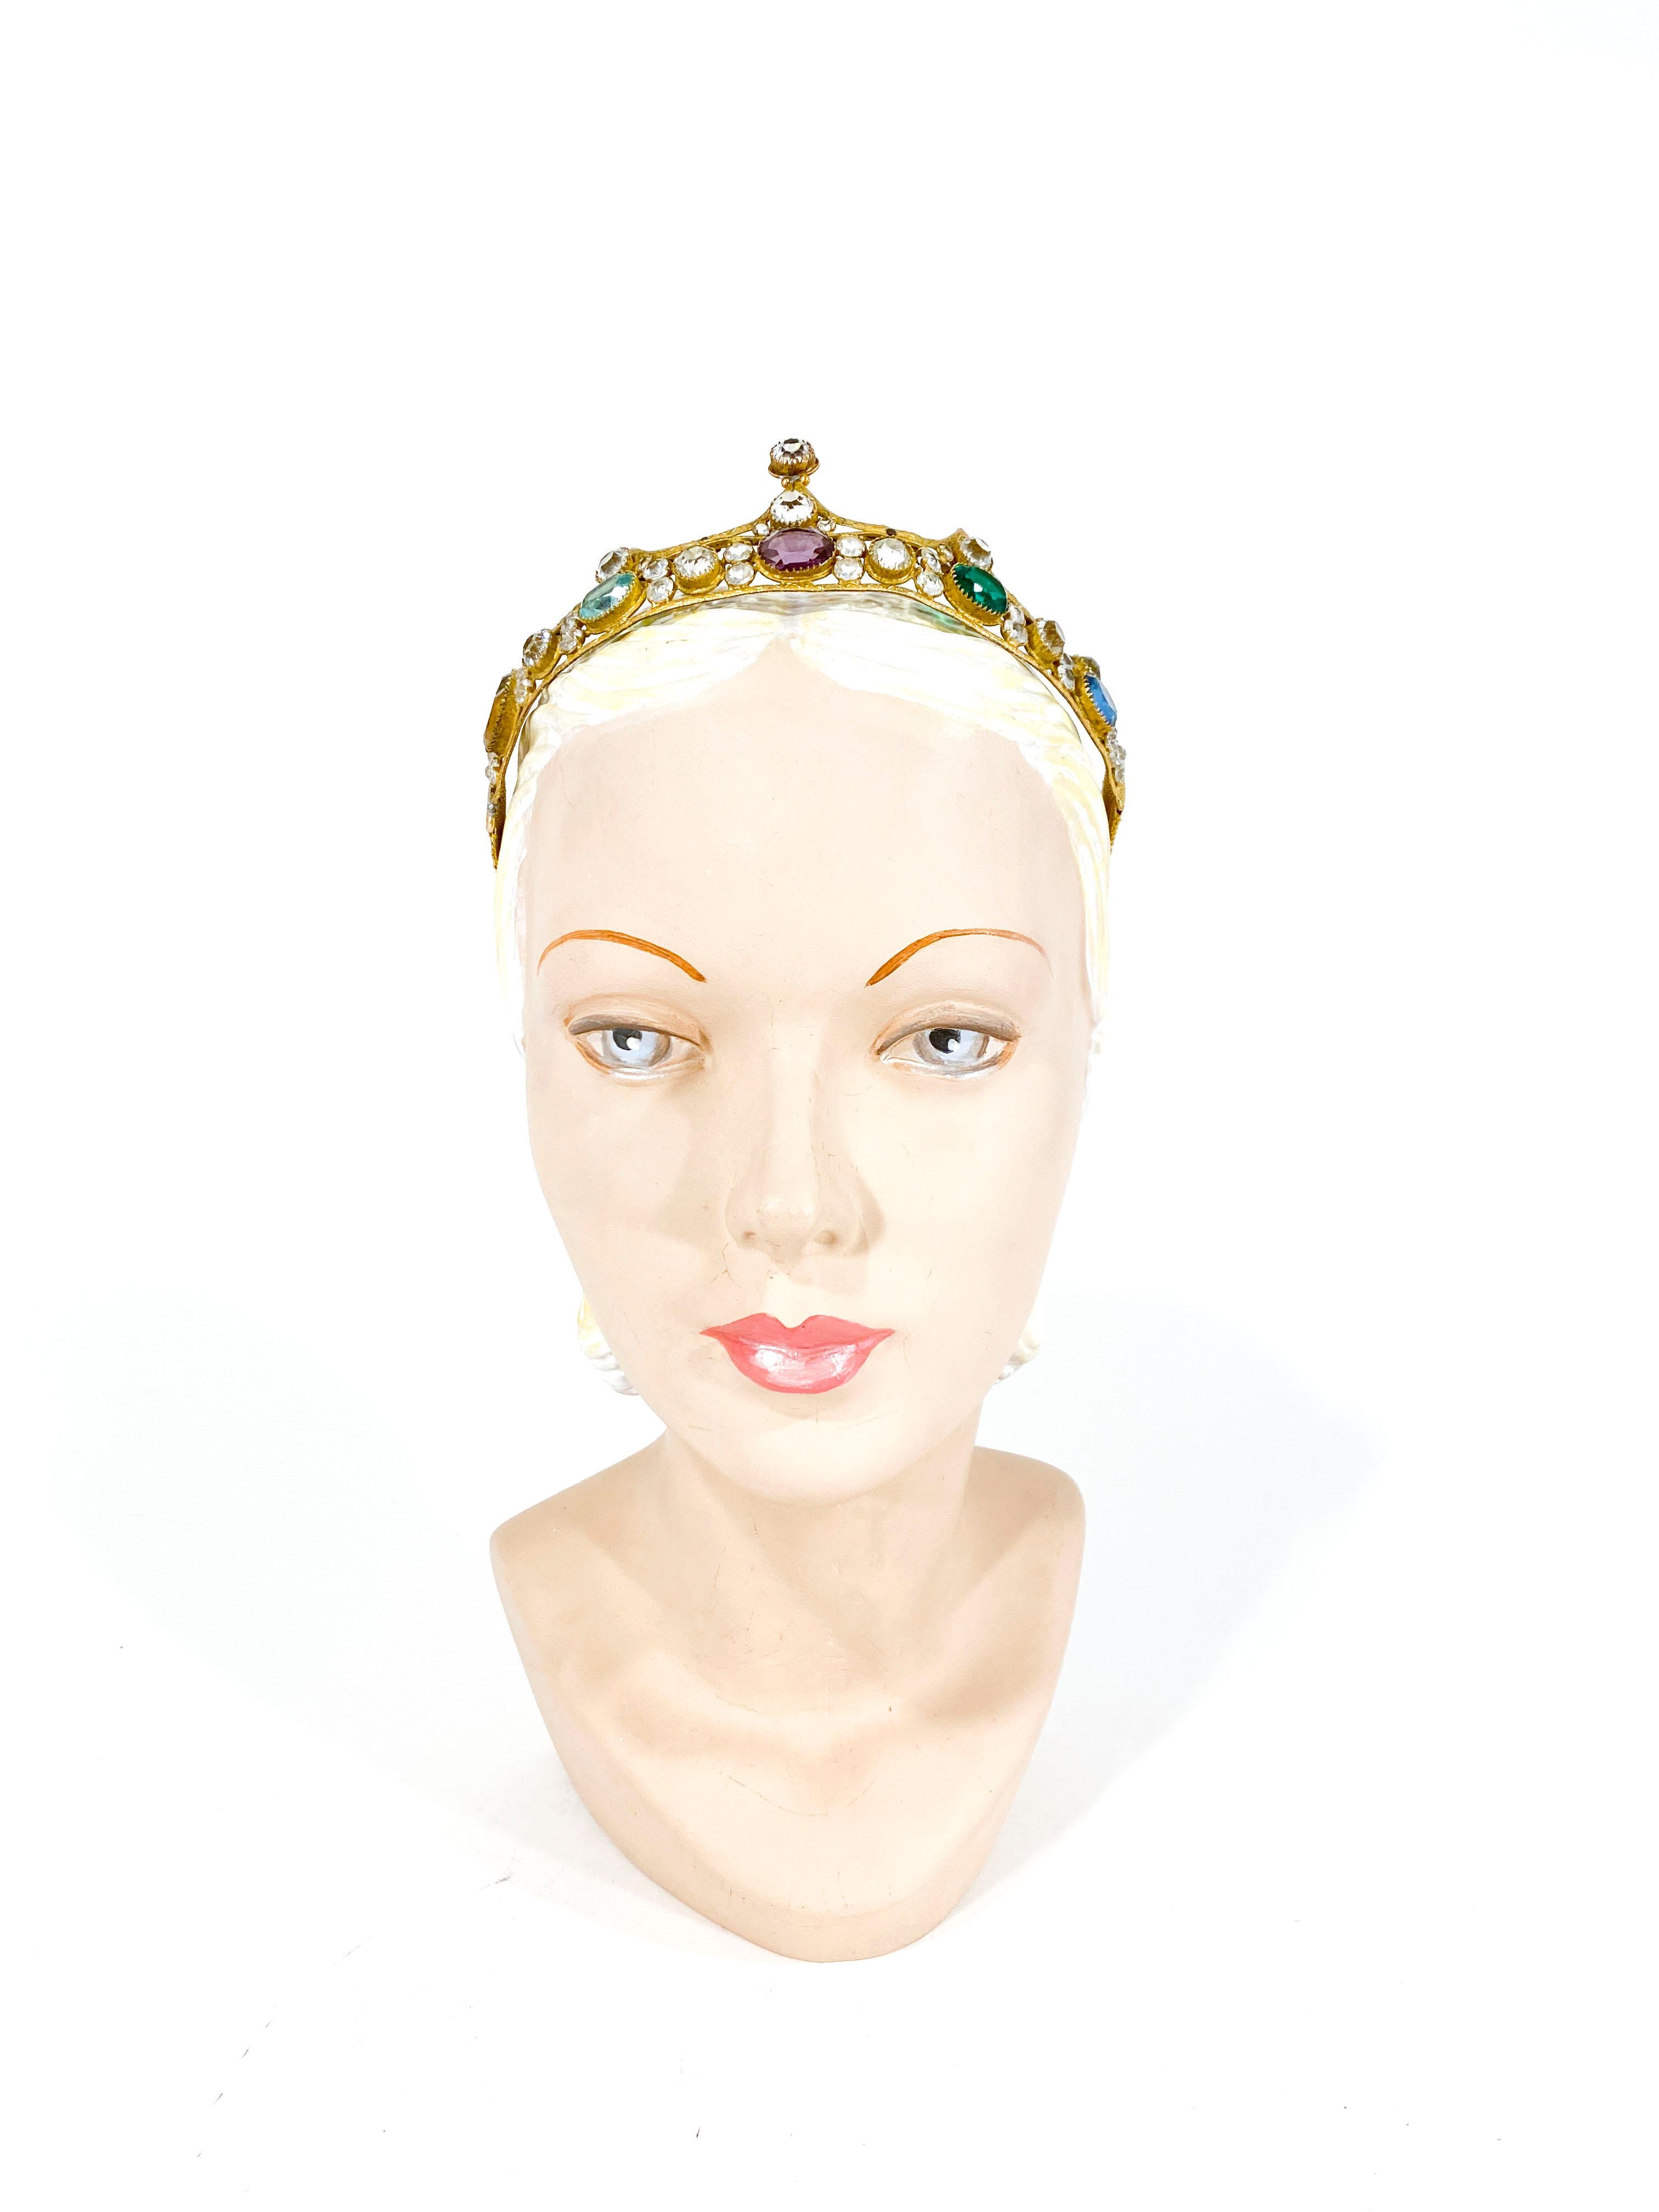 1920s brass tiara with origin multi-colored Czech glass crystals. The crystals are brilliant and and larger ones are colored in gold, aqua, lavender, green, and light blue. The security band has been replaced with a gold band and elastic for comfort